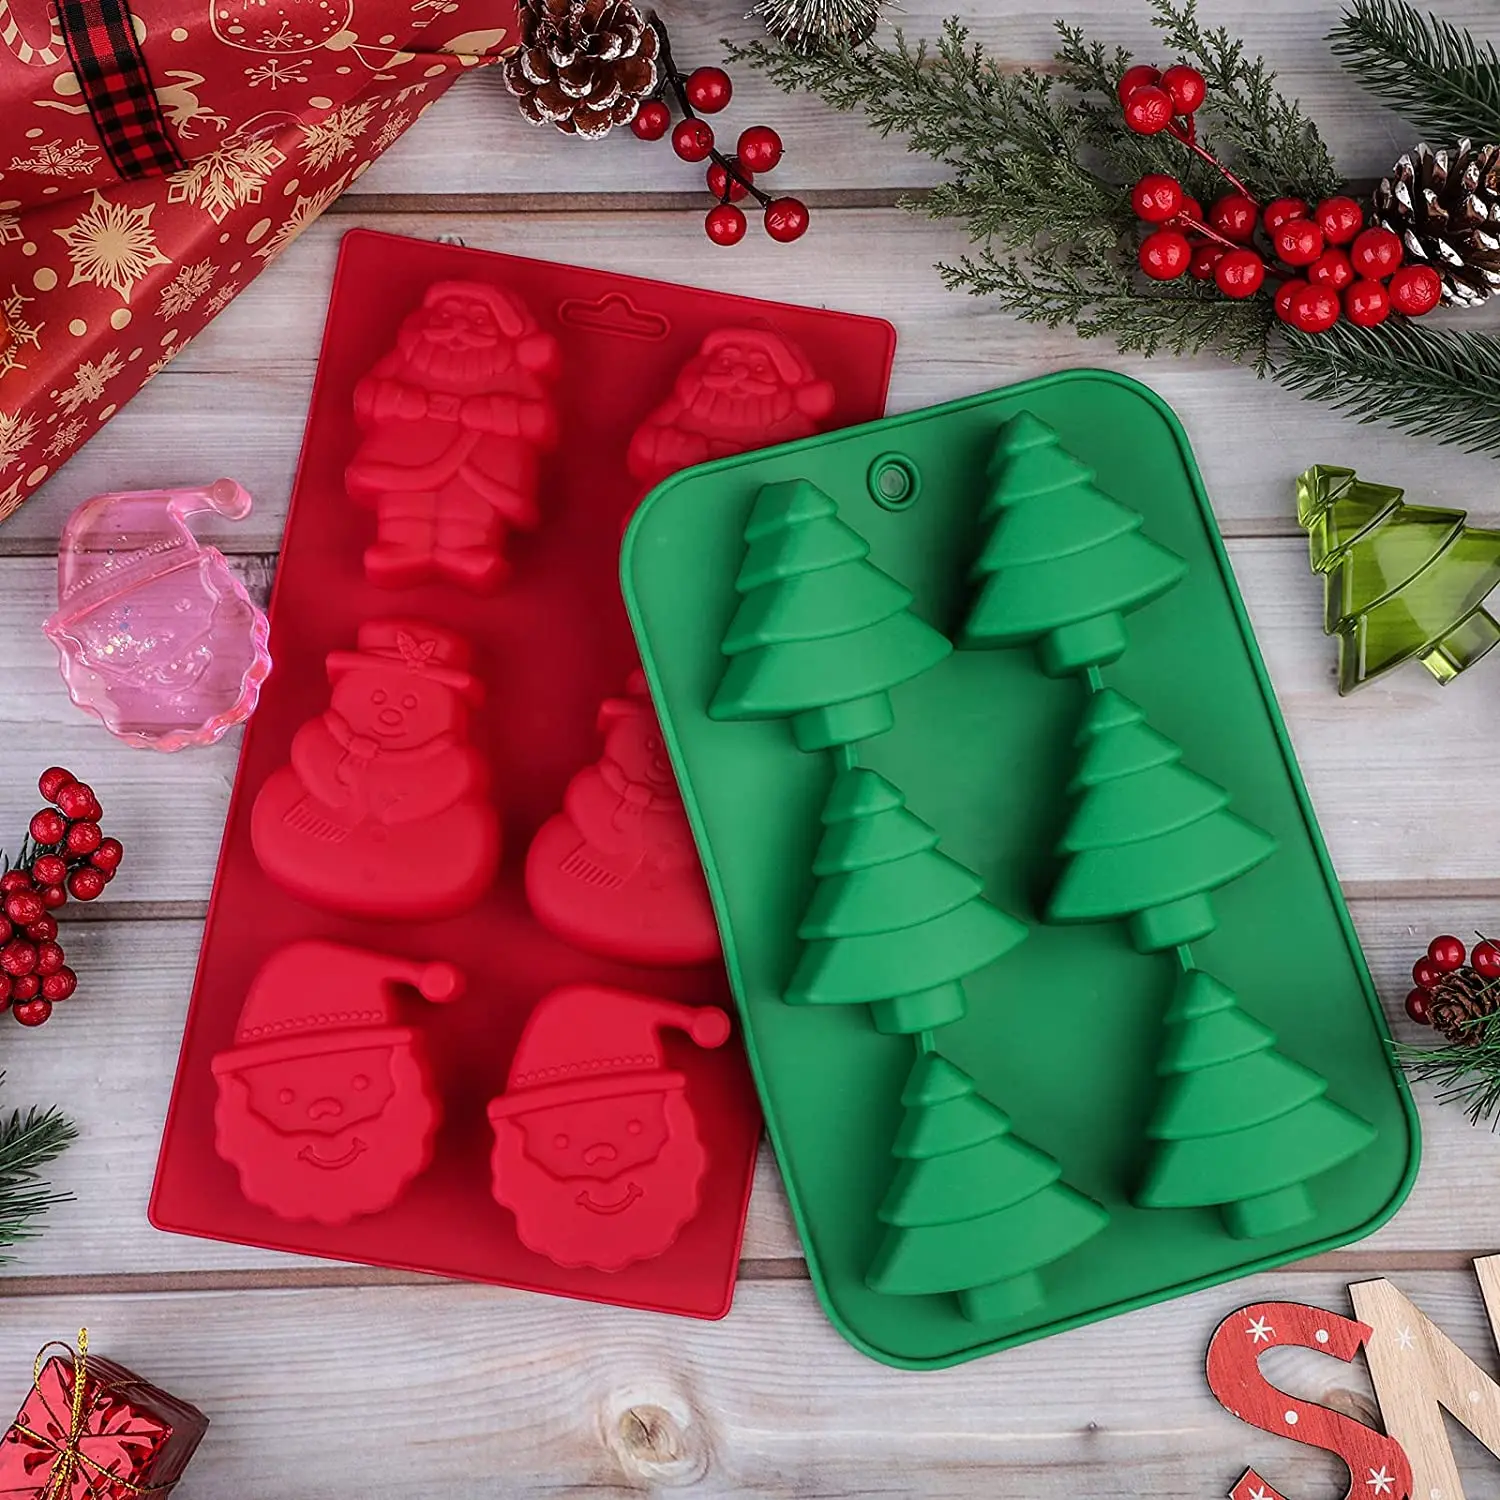 Silicone Molds Candy Molds Christmas Chocolate Molds  Christmas Tree Patterns for Christmas DIY Party